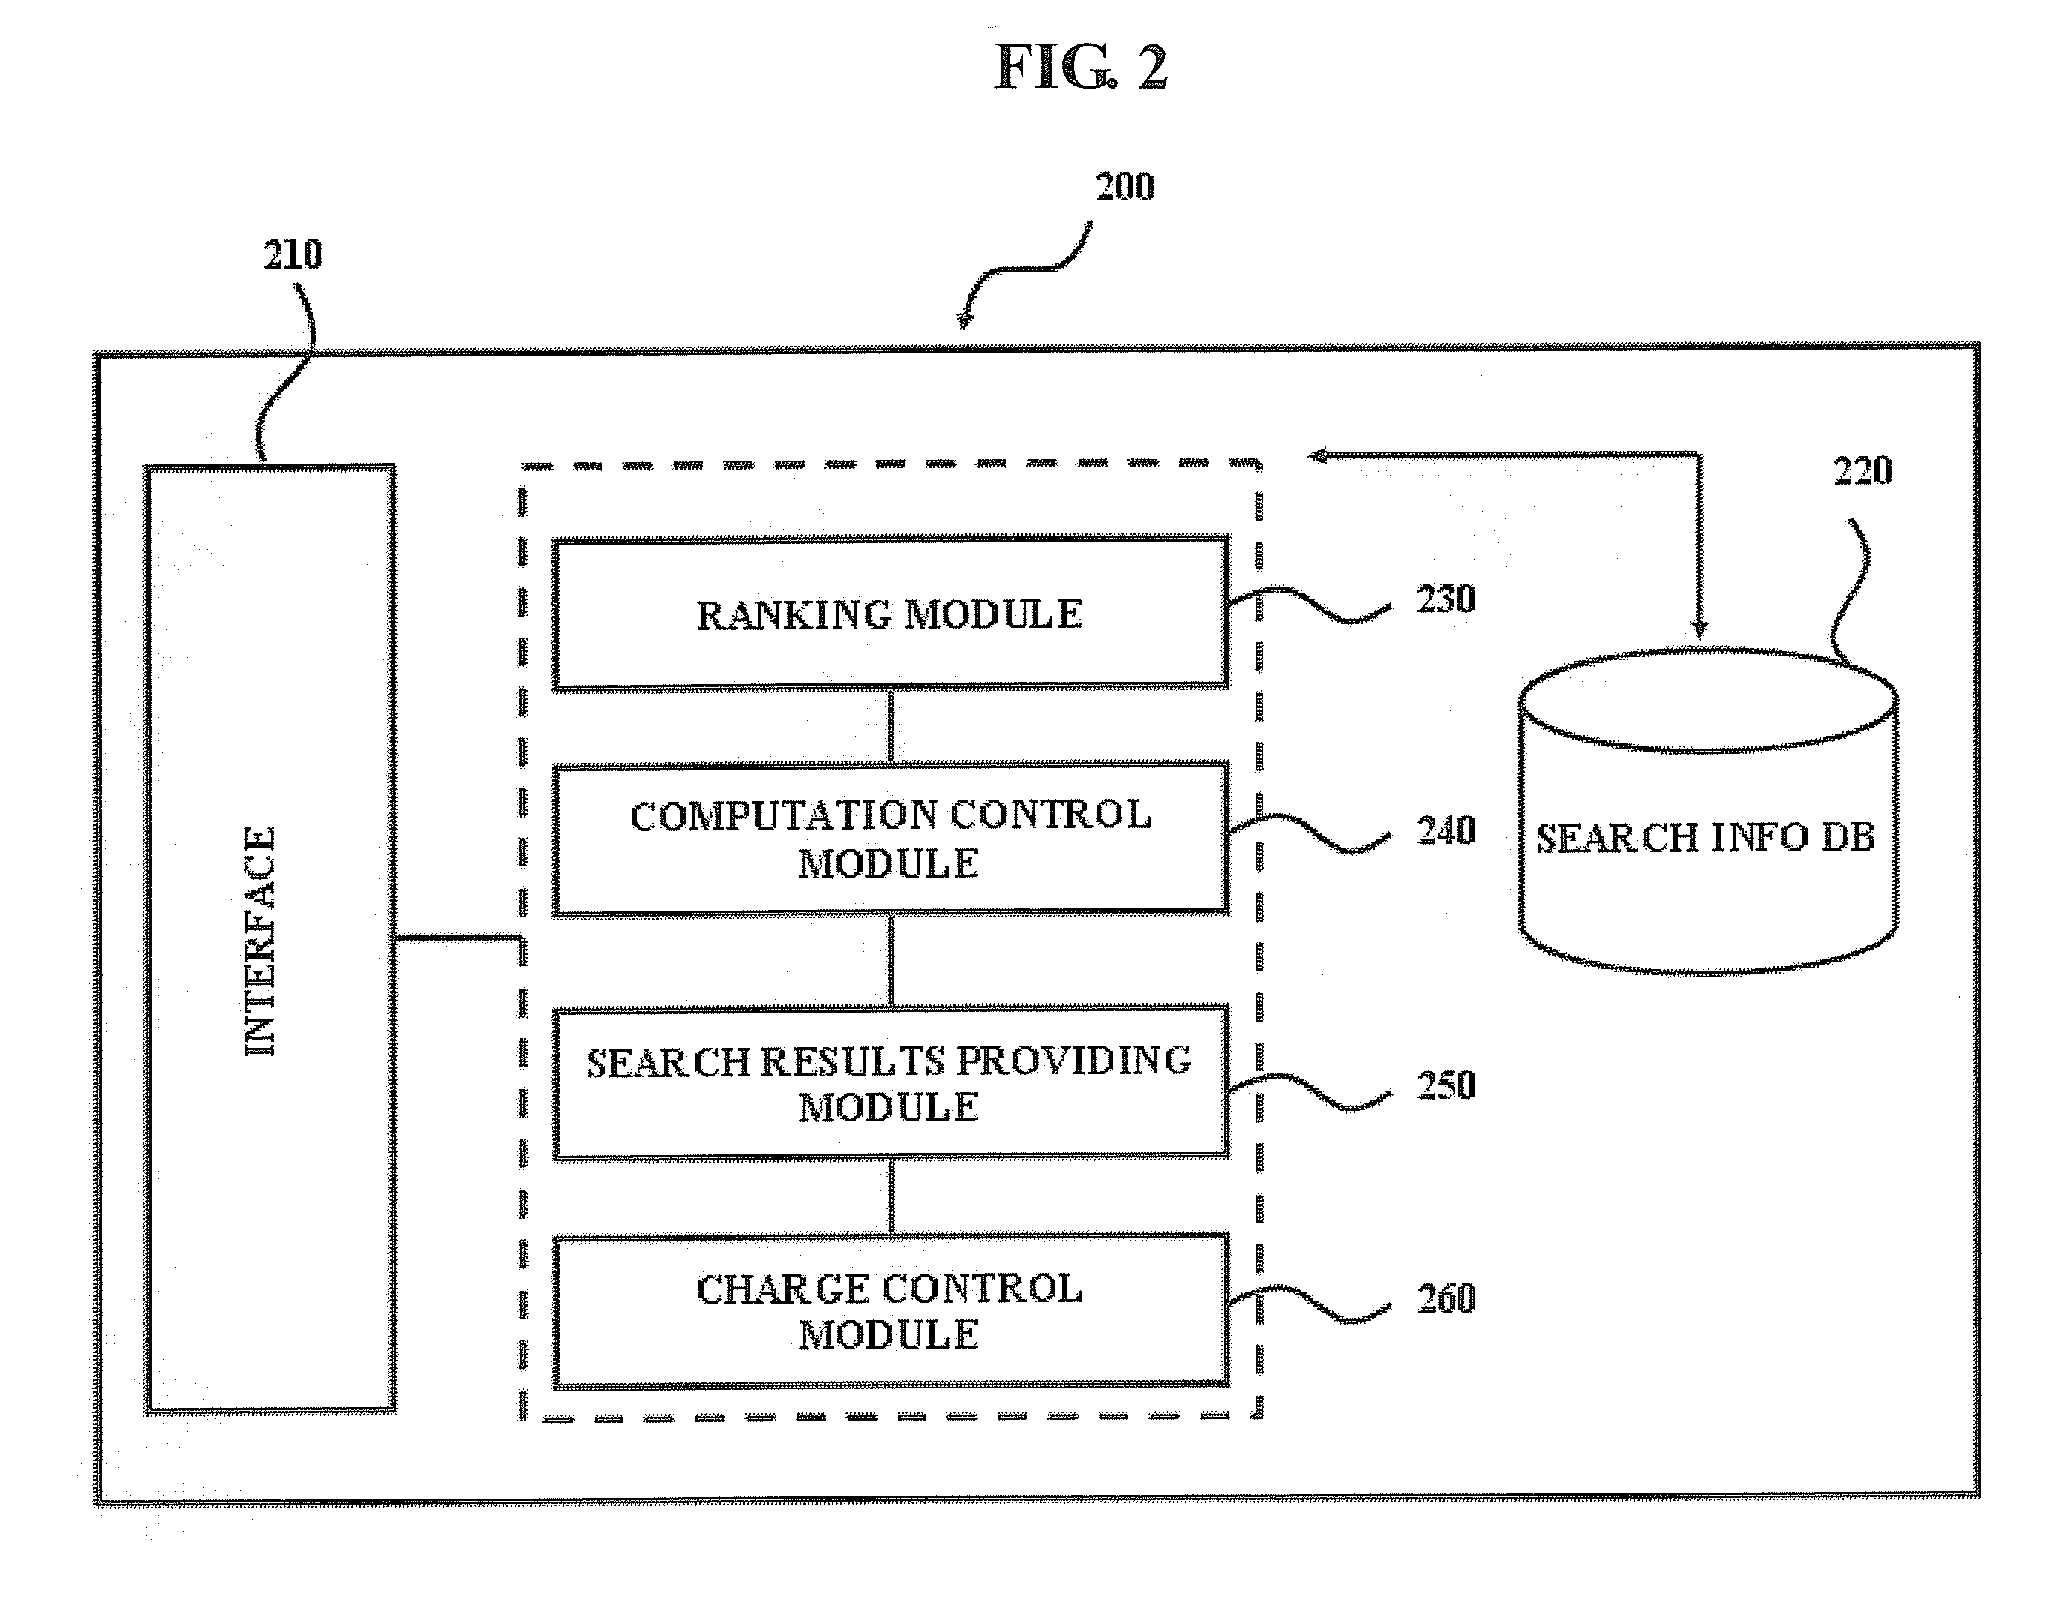 System and Method for Selecting Search Listing in an Internet Search Engine and Ordering the Search Listings